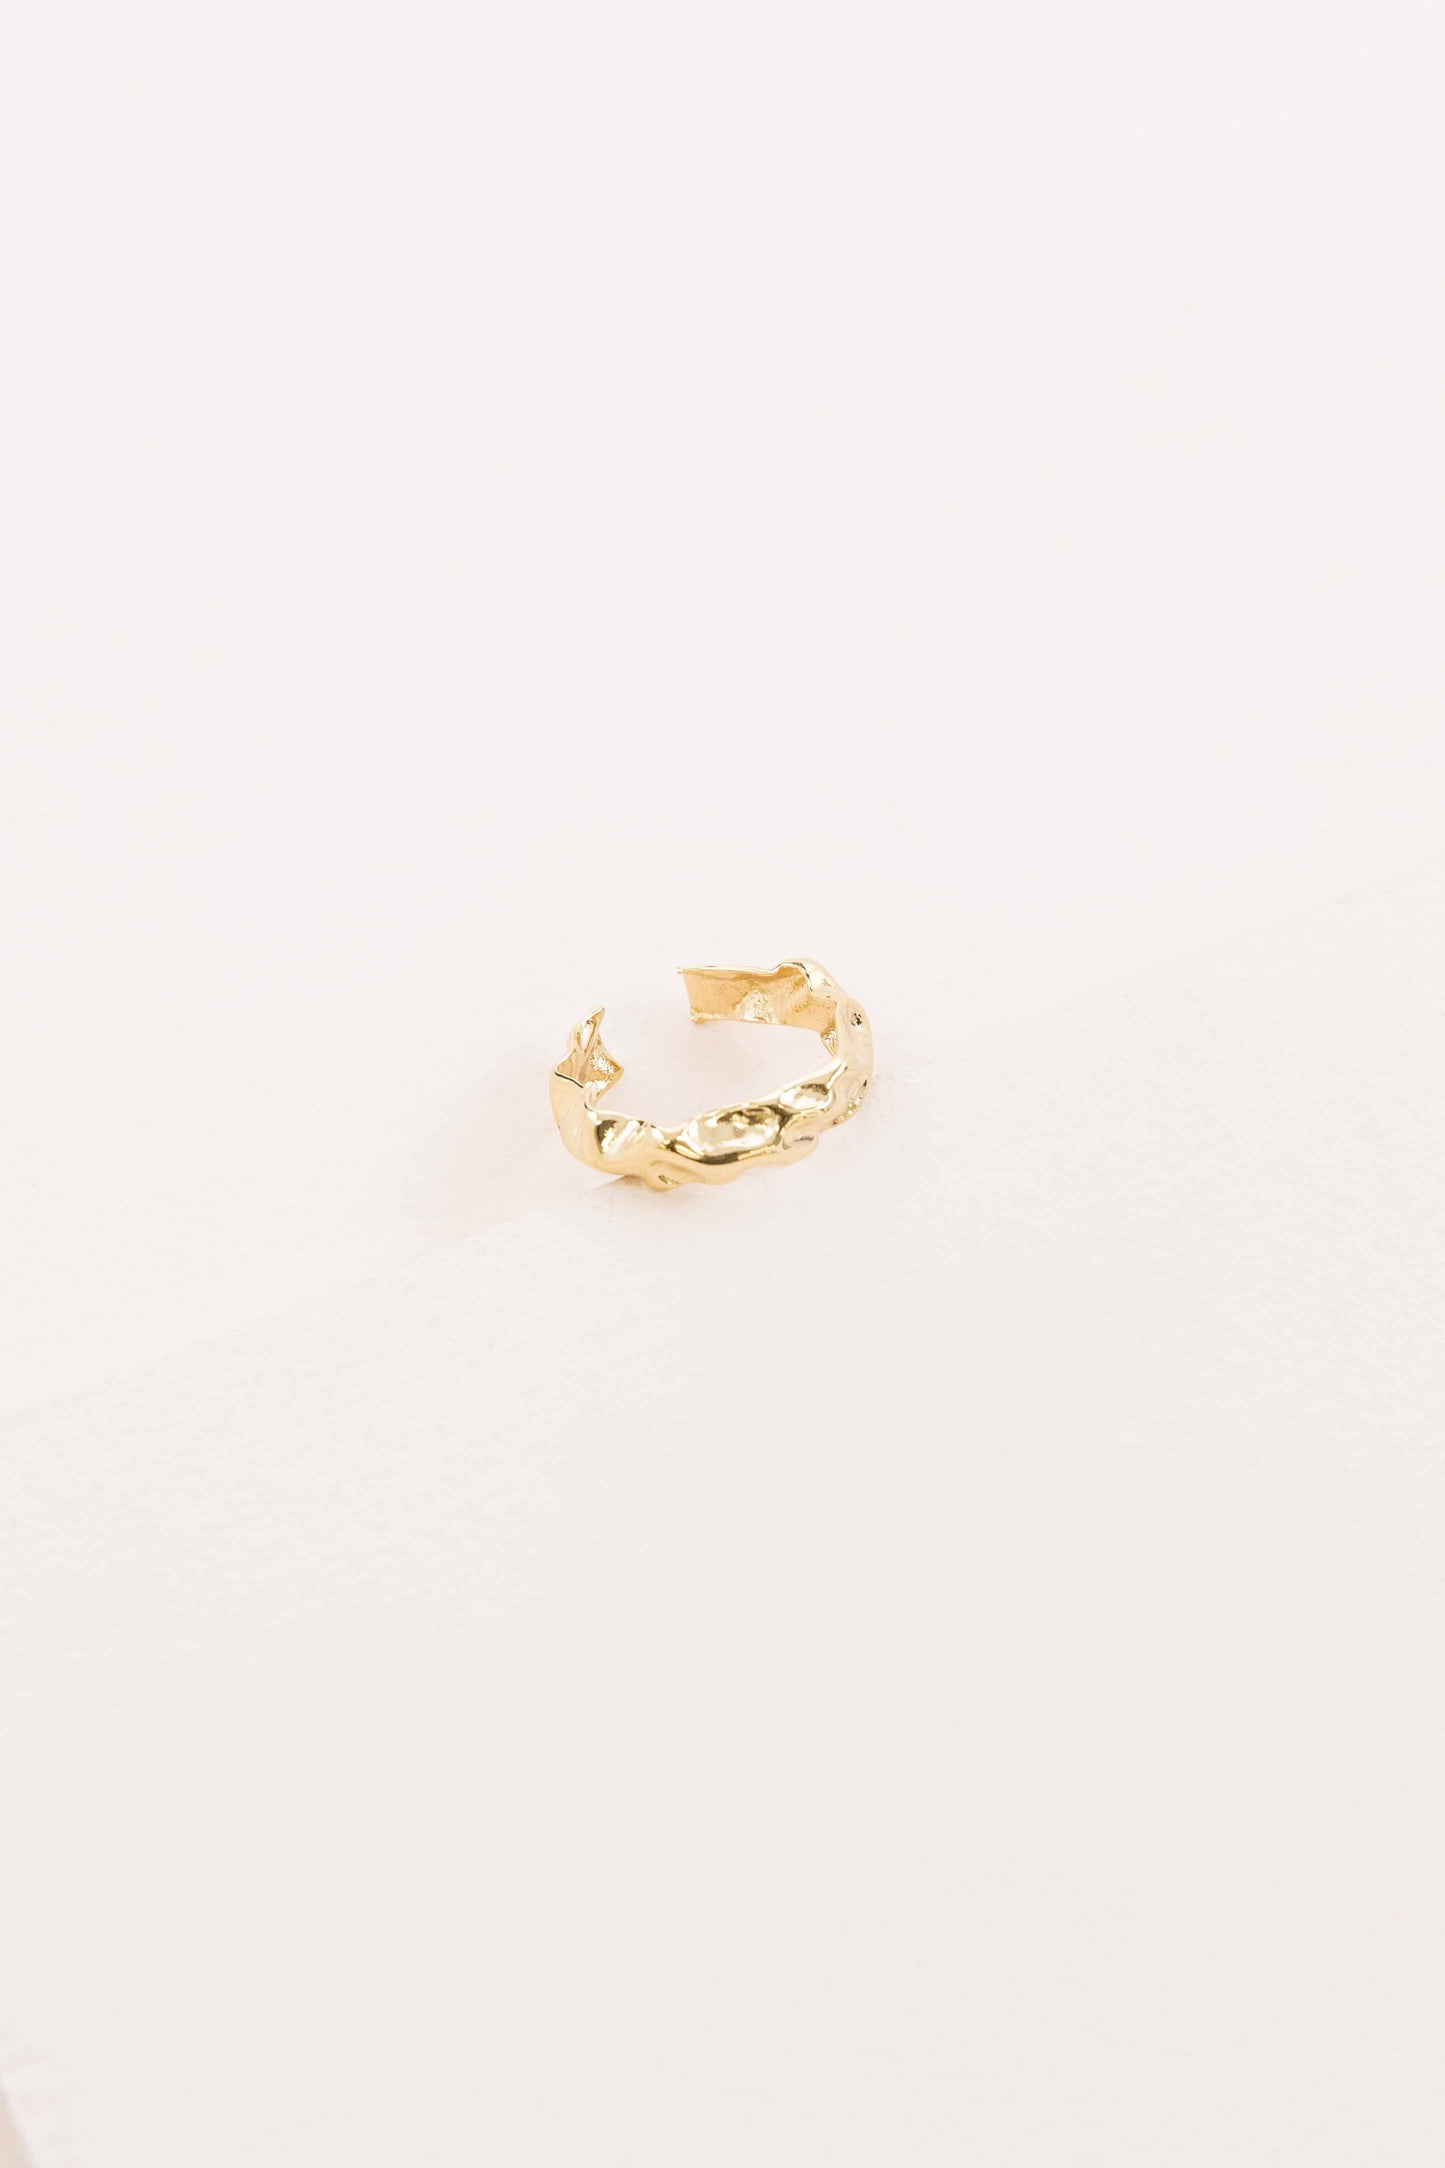 Gold Textured Ring